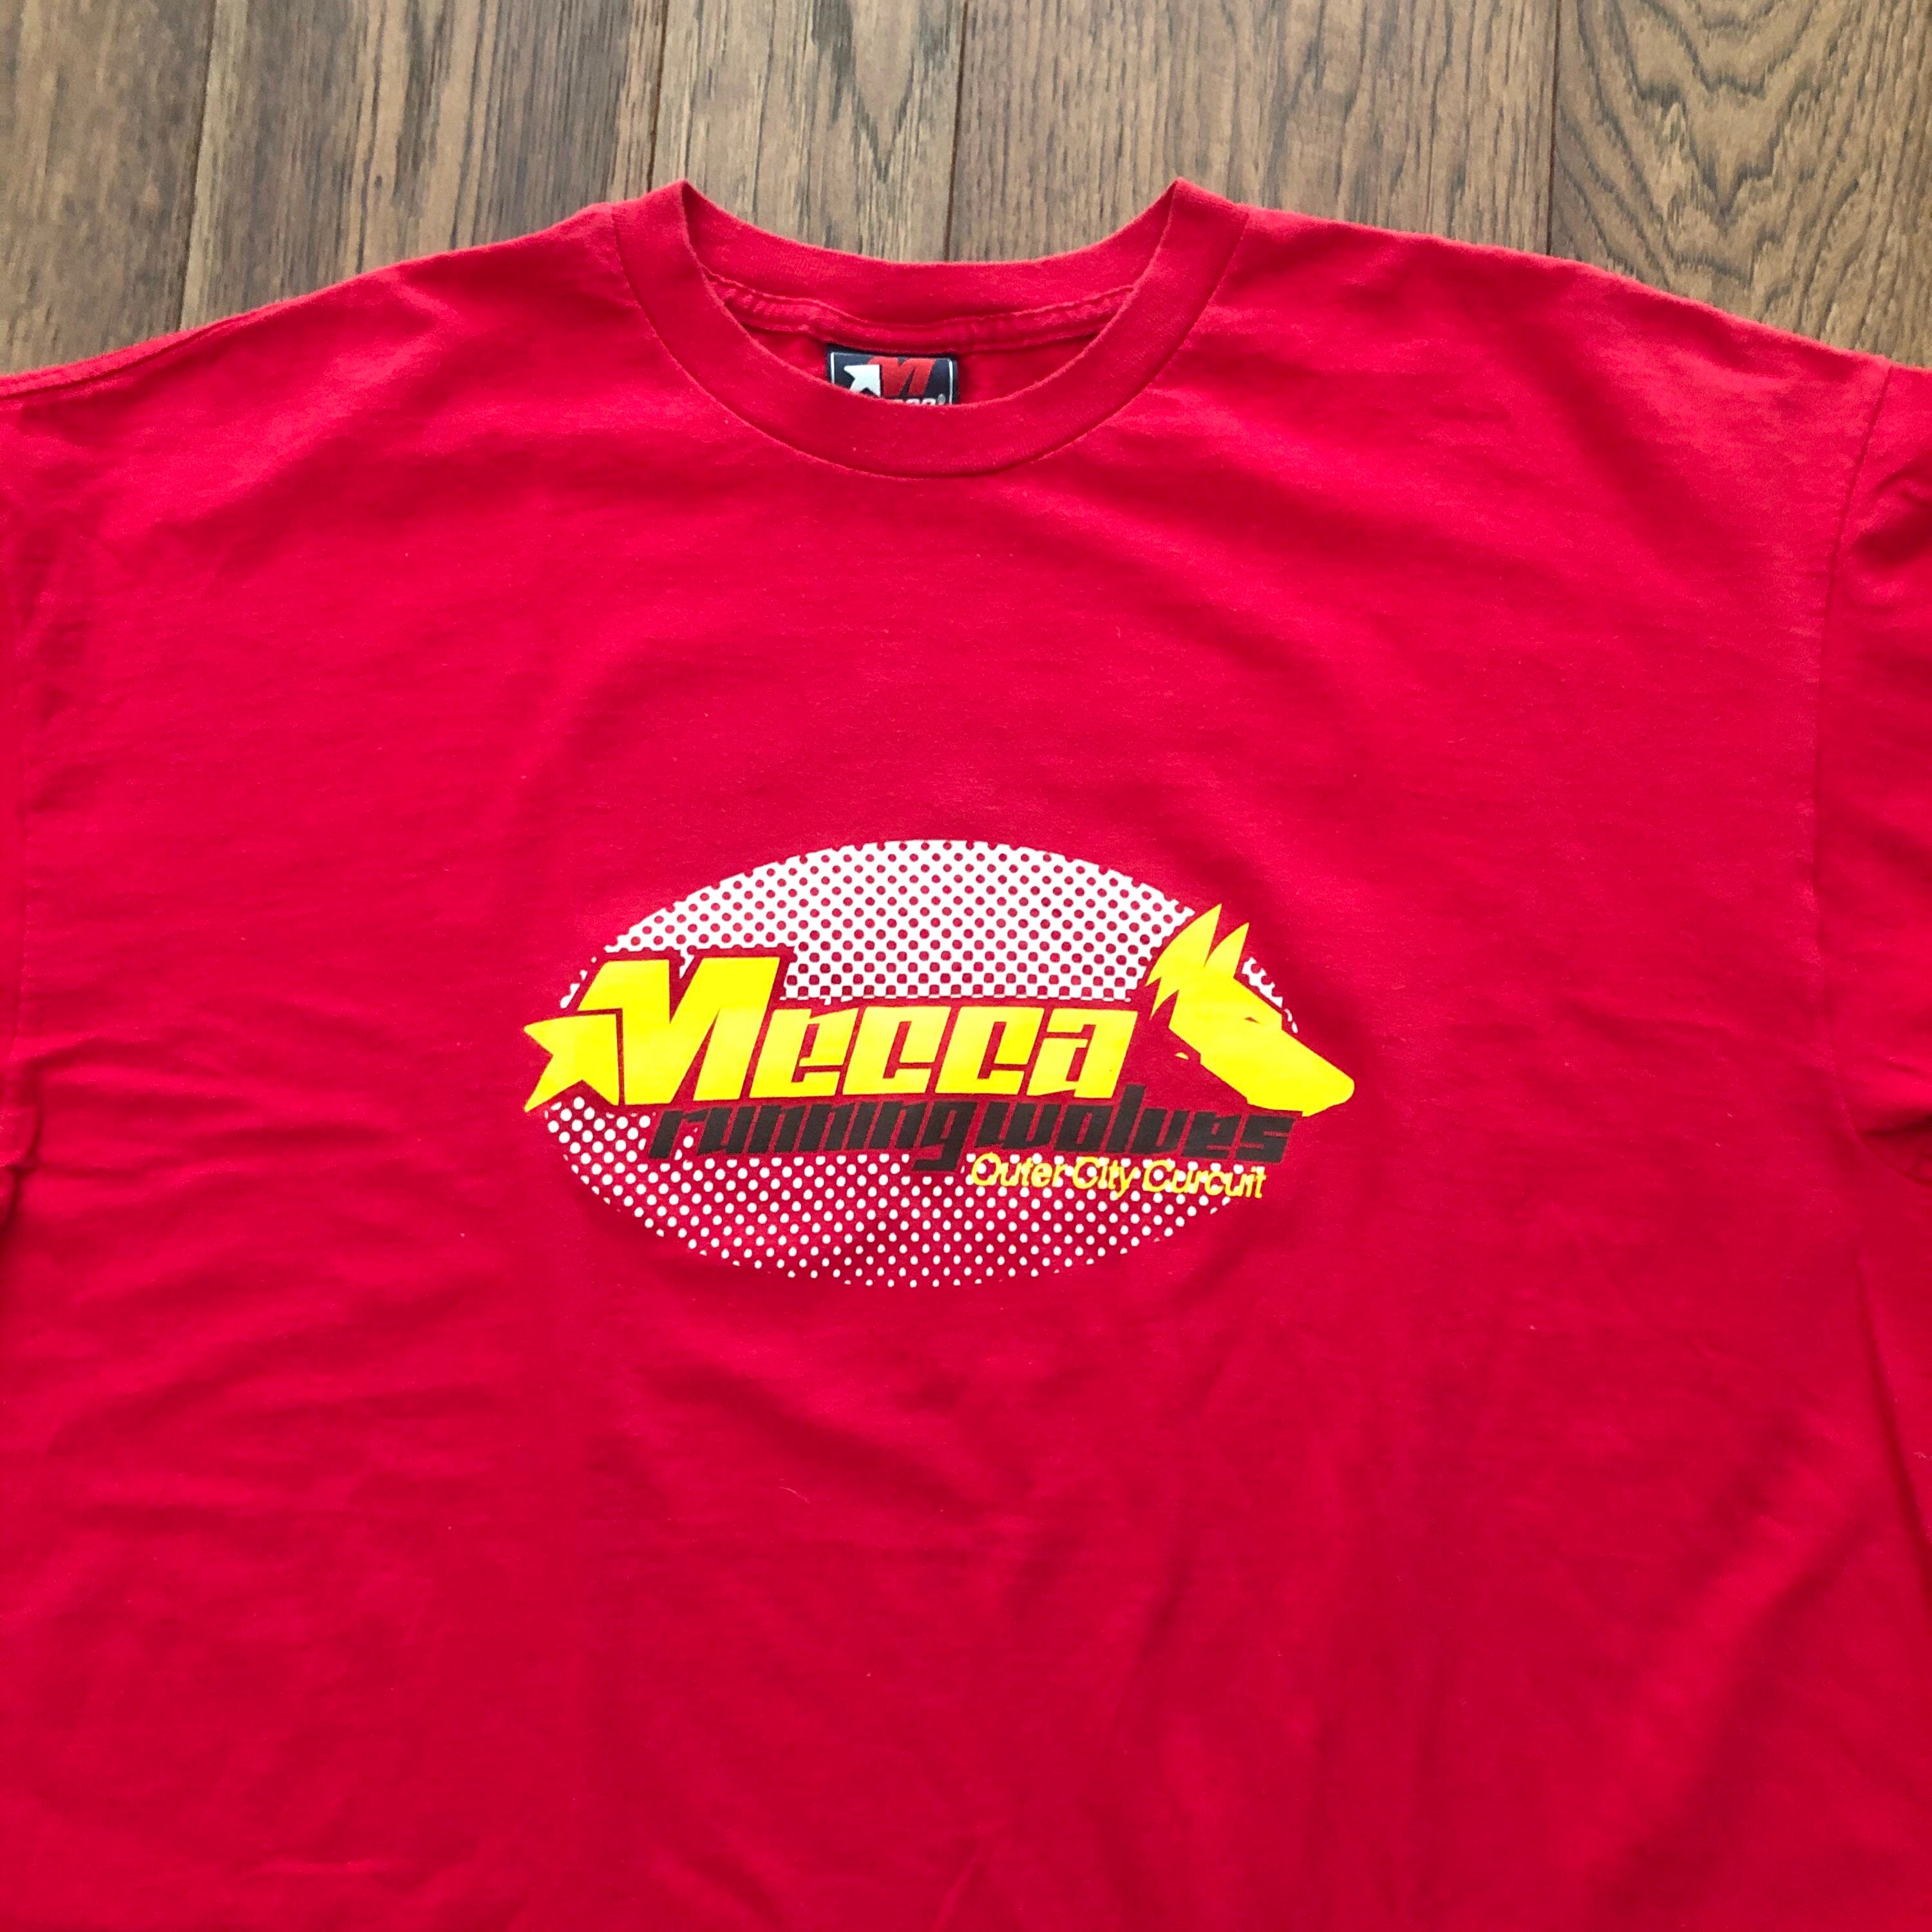 Vintage 90s Mecca USA Red and Yellow Graphic T Shirt Made in ...